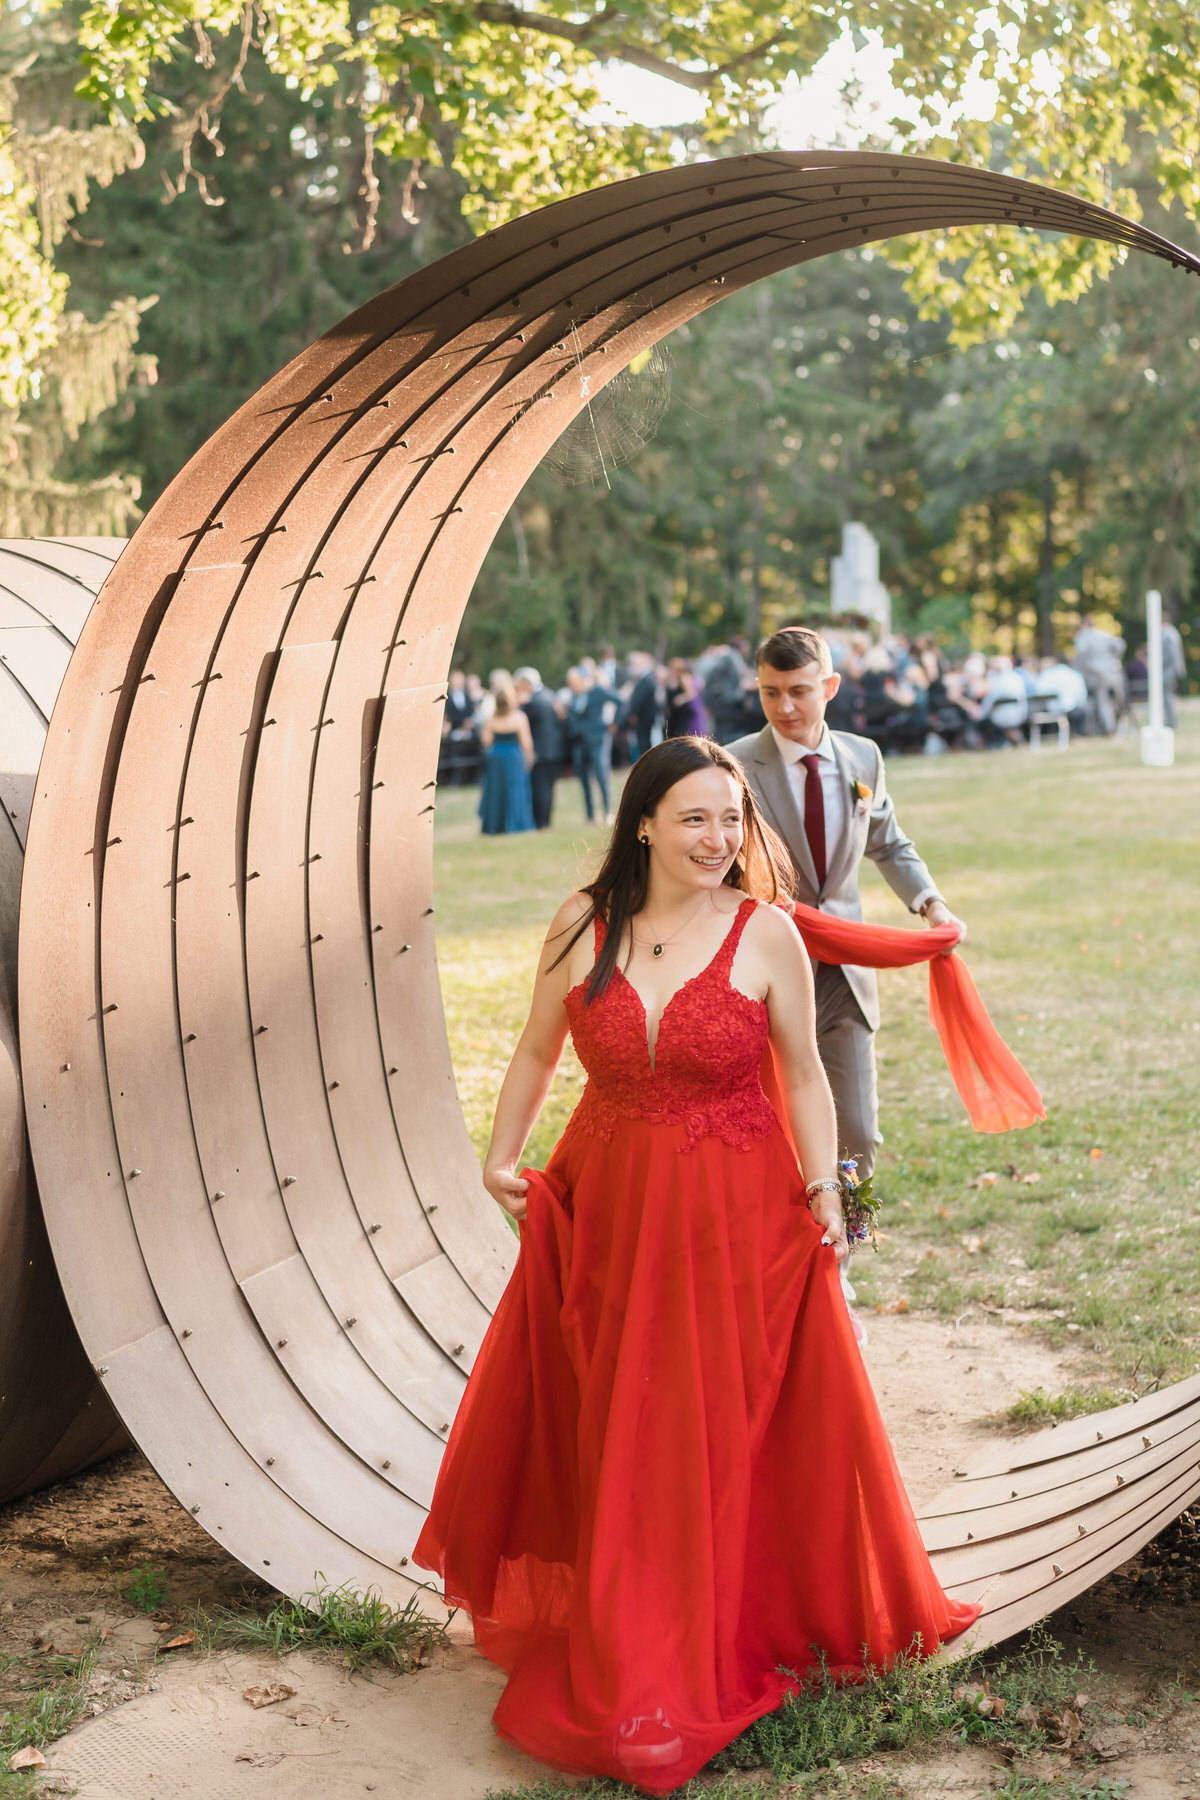 deCordova Sculpture Park and Museum wedding by nicole chan photography - non traditional jewish wedding